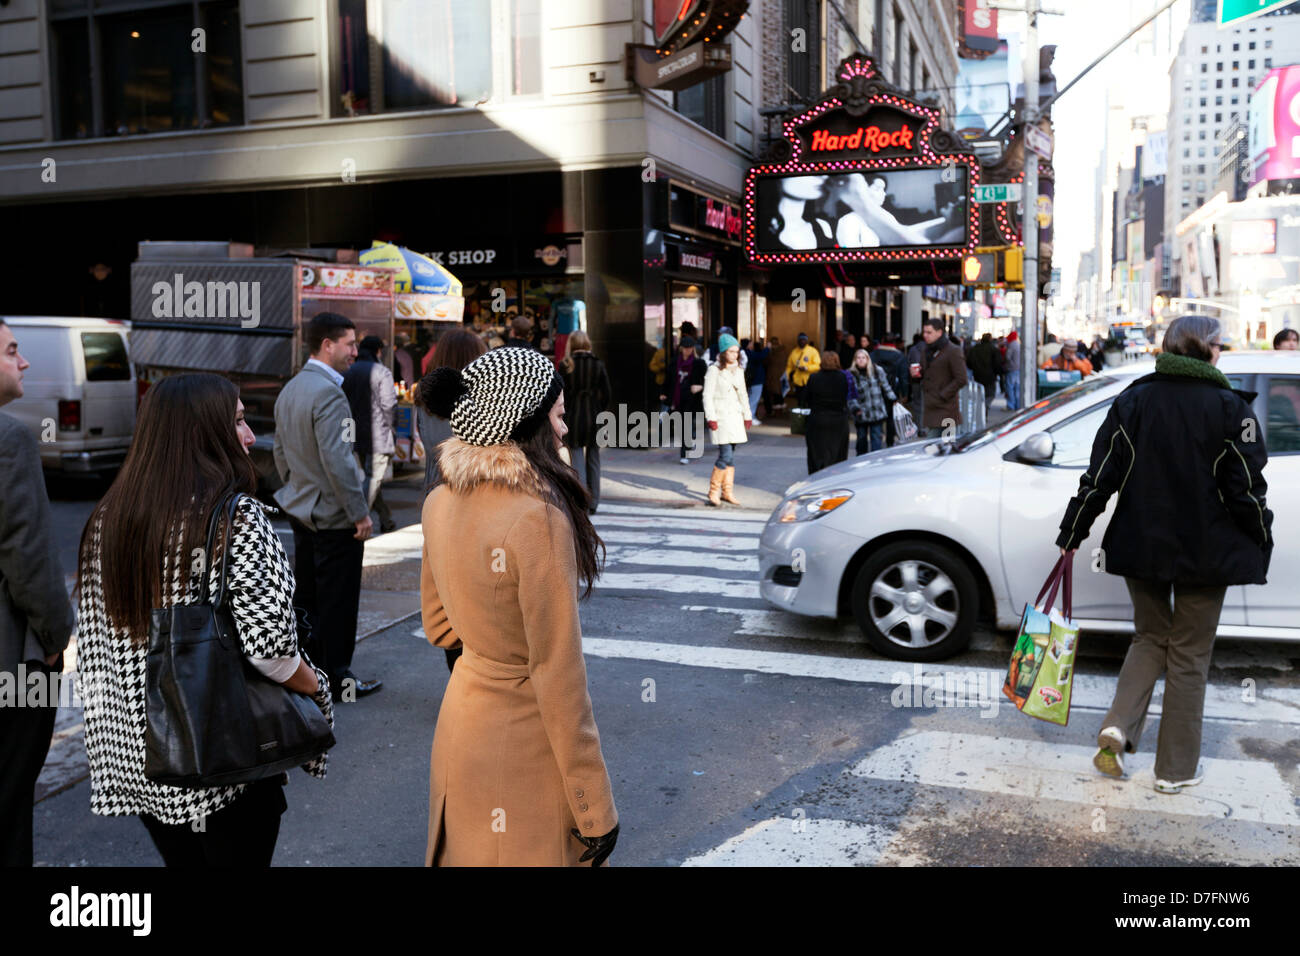 New-York USA - November 6th 2012: Pedestrians waiting on sidewalk while cars rush down street at Times Square in Manhattan at Stock Photo